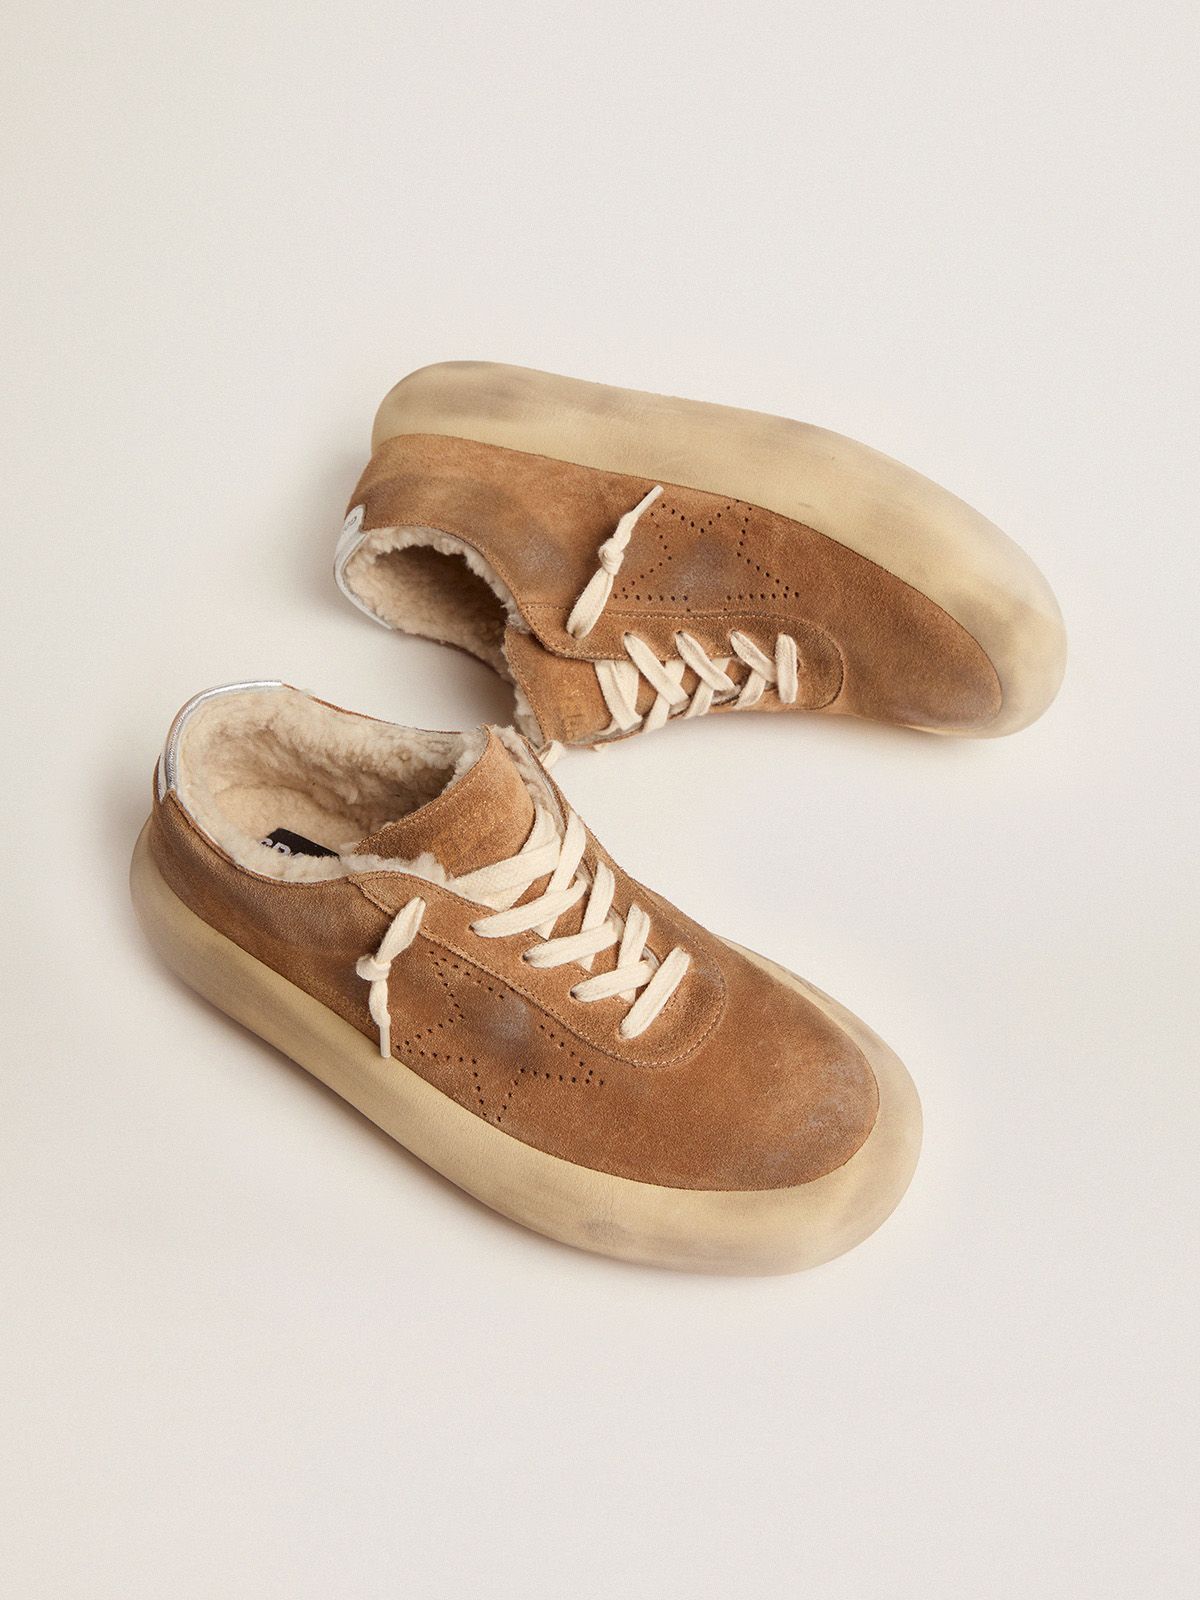 Space-Star Shoes in Tobacco-Colored Suede with Shearling Lining